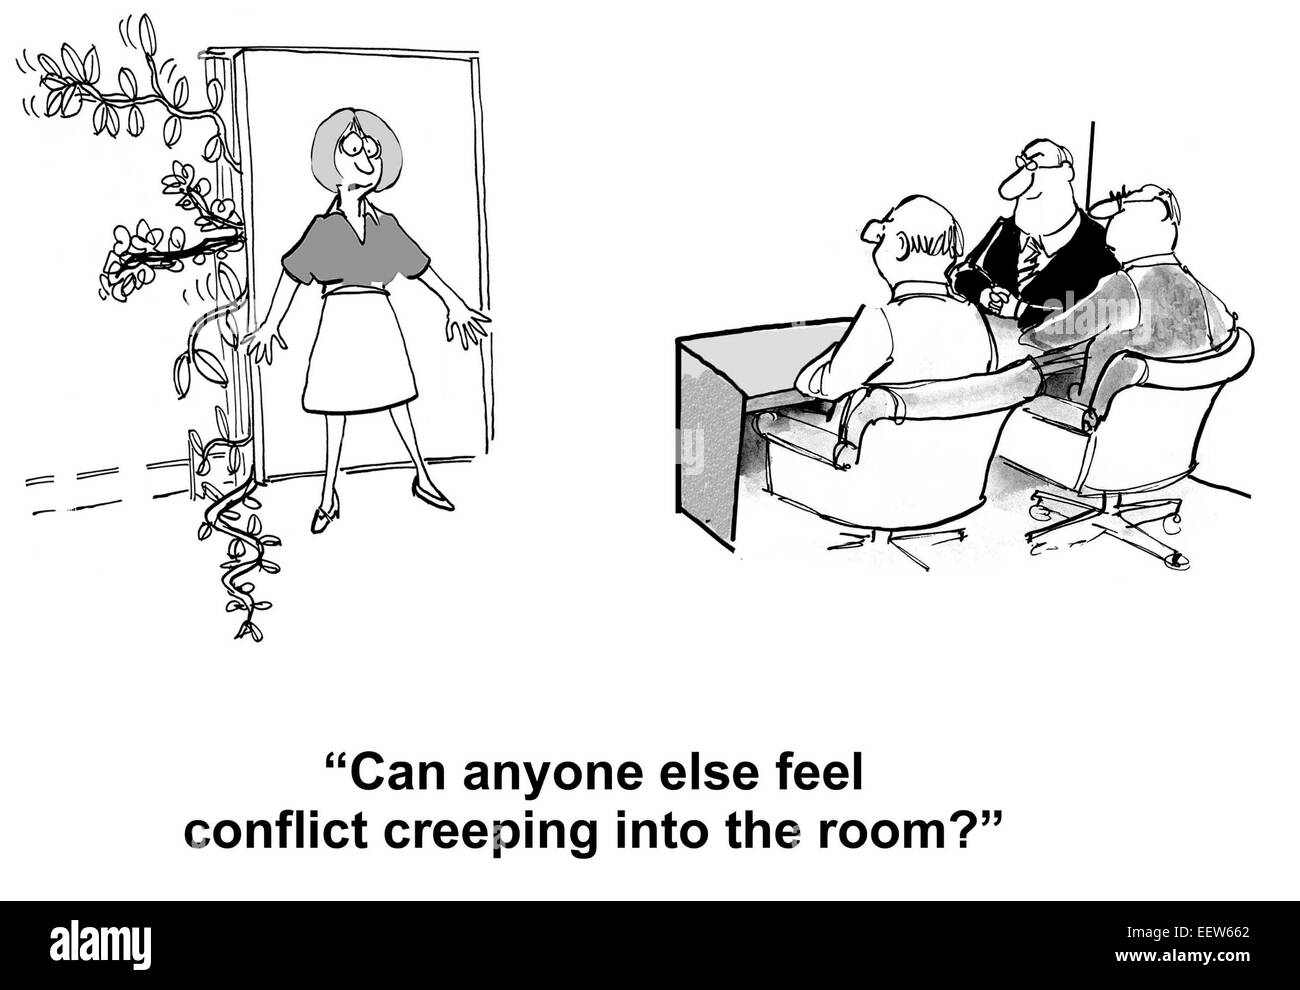 Cartoon of businesswoman holding back 'creep' and asking if anyone else can feel conflict creeping into the meeting room. Stock Photo